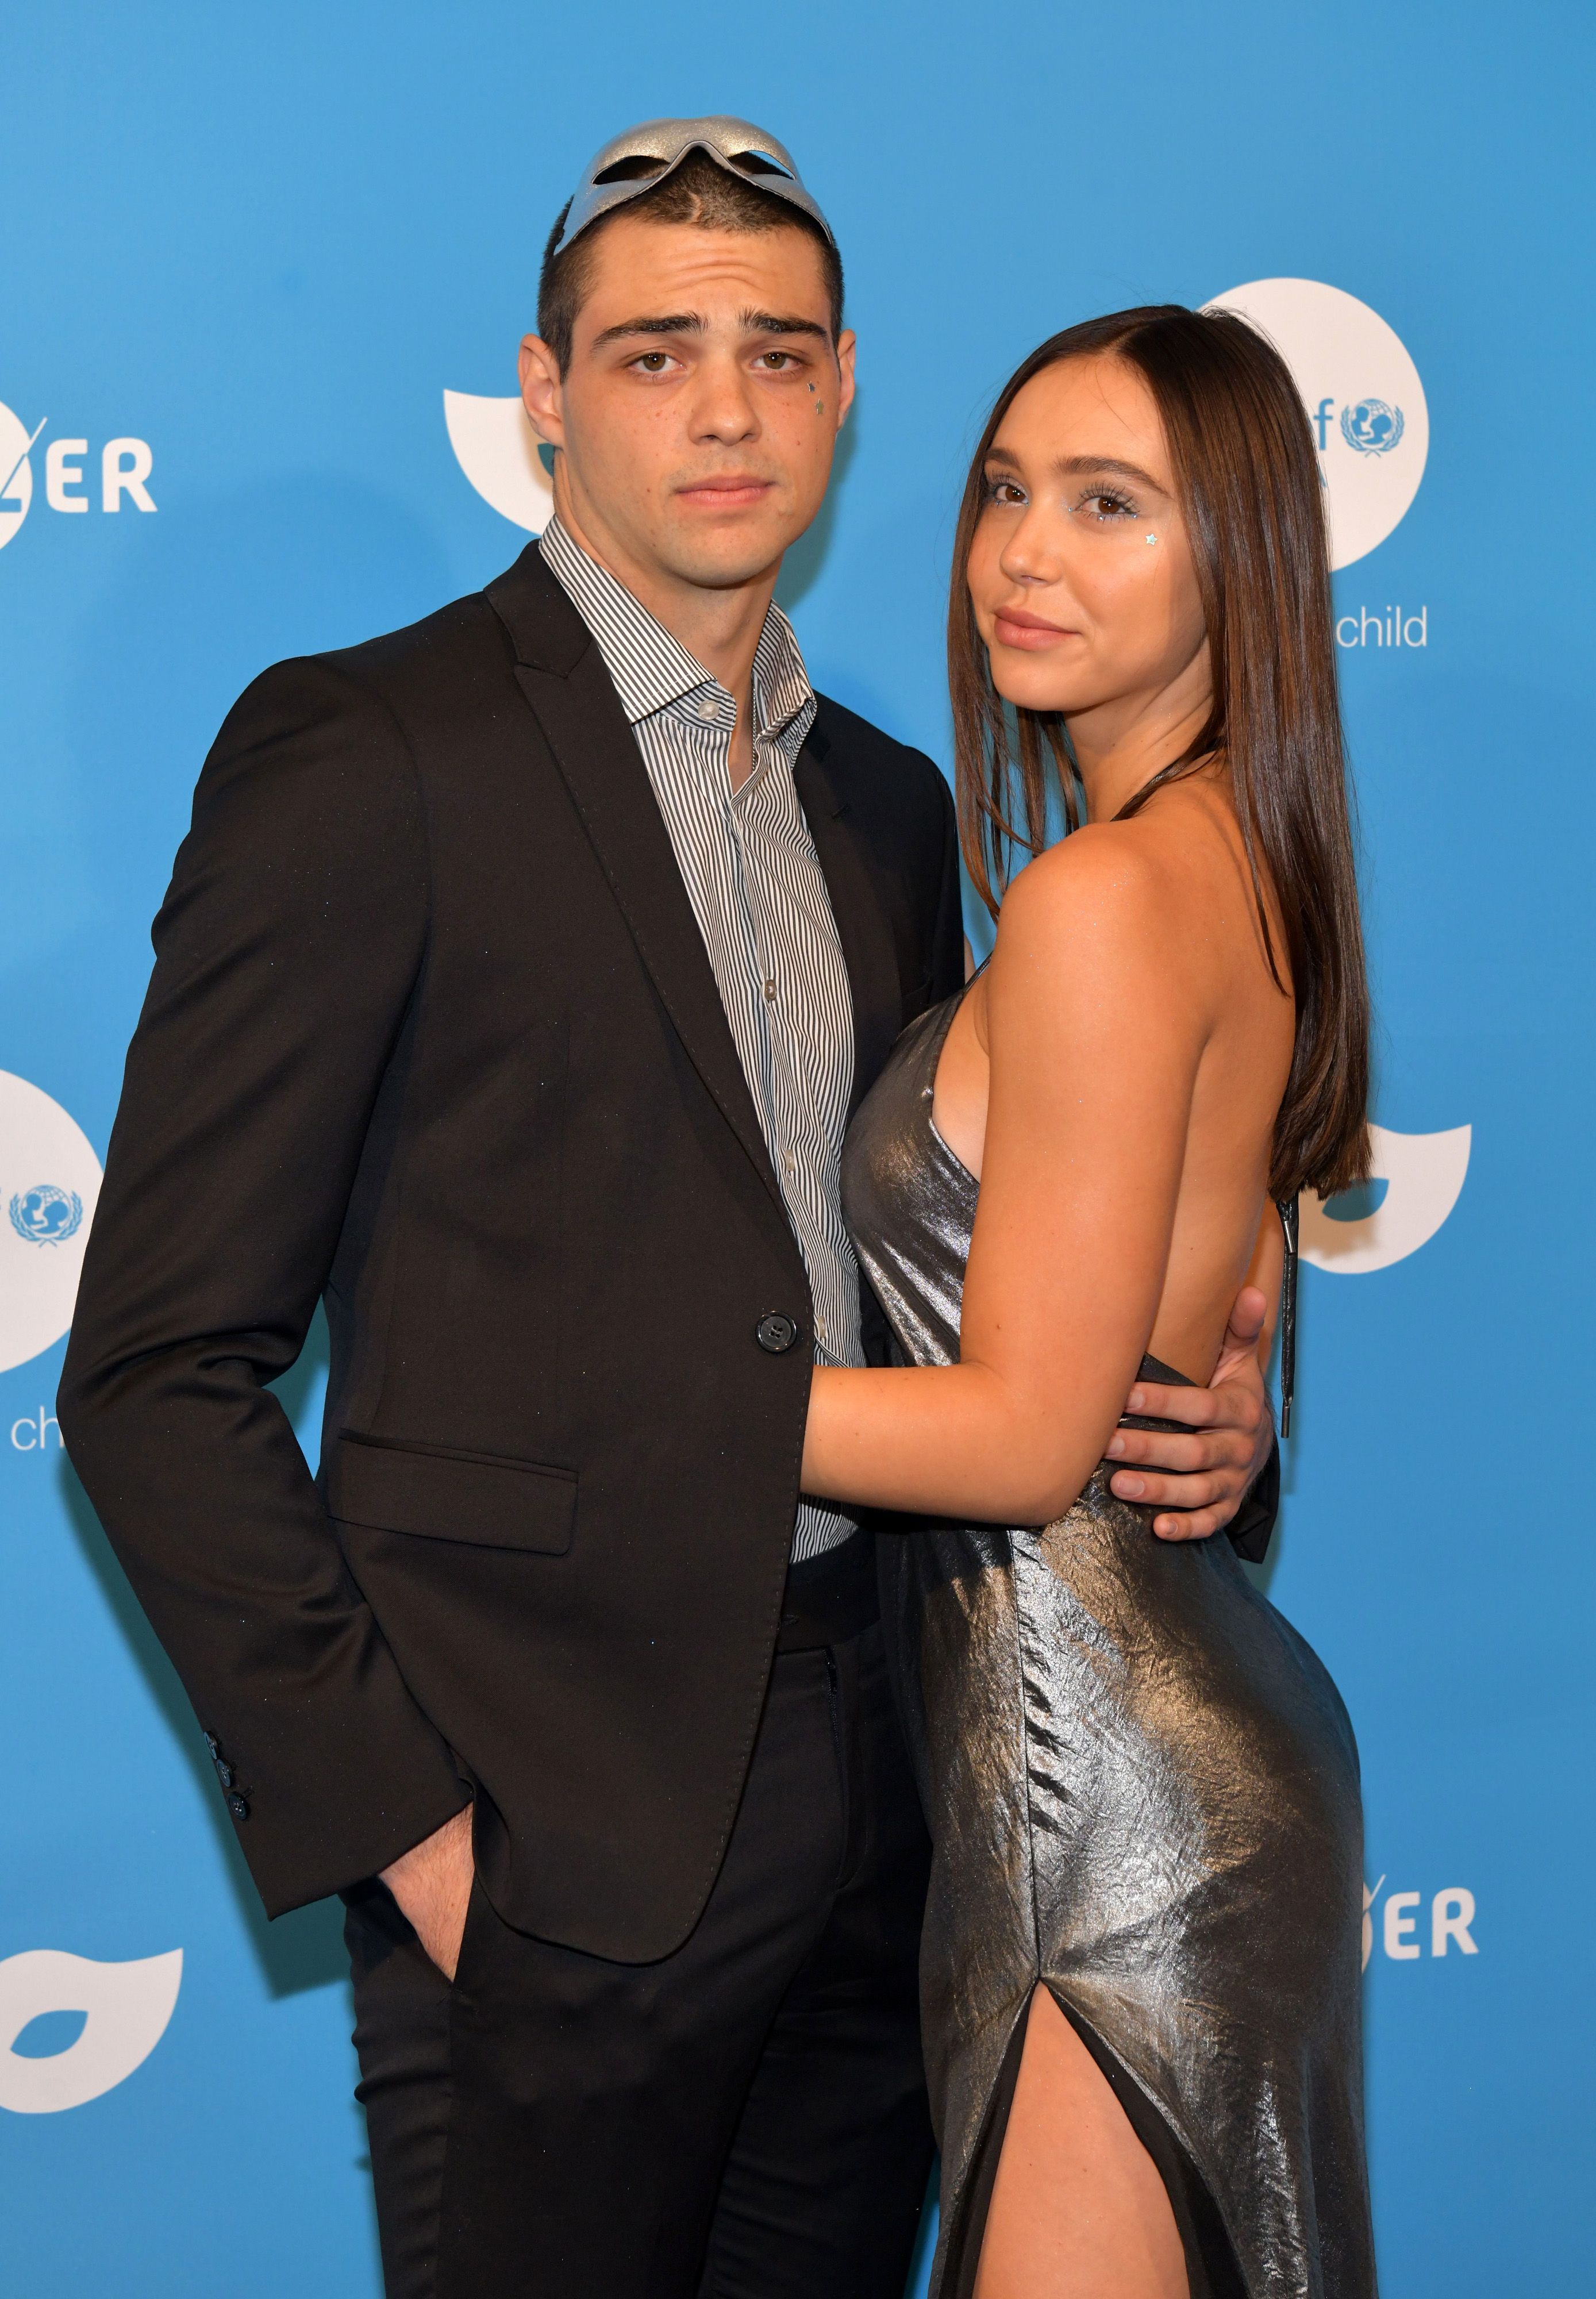 Noah Centineo and Alexis Ren attend the UNICEF Masquerade Ball at Kimpton La Peer Hotel on October 26, 2019, in West Hollywood, California. | Source: Getty Images